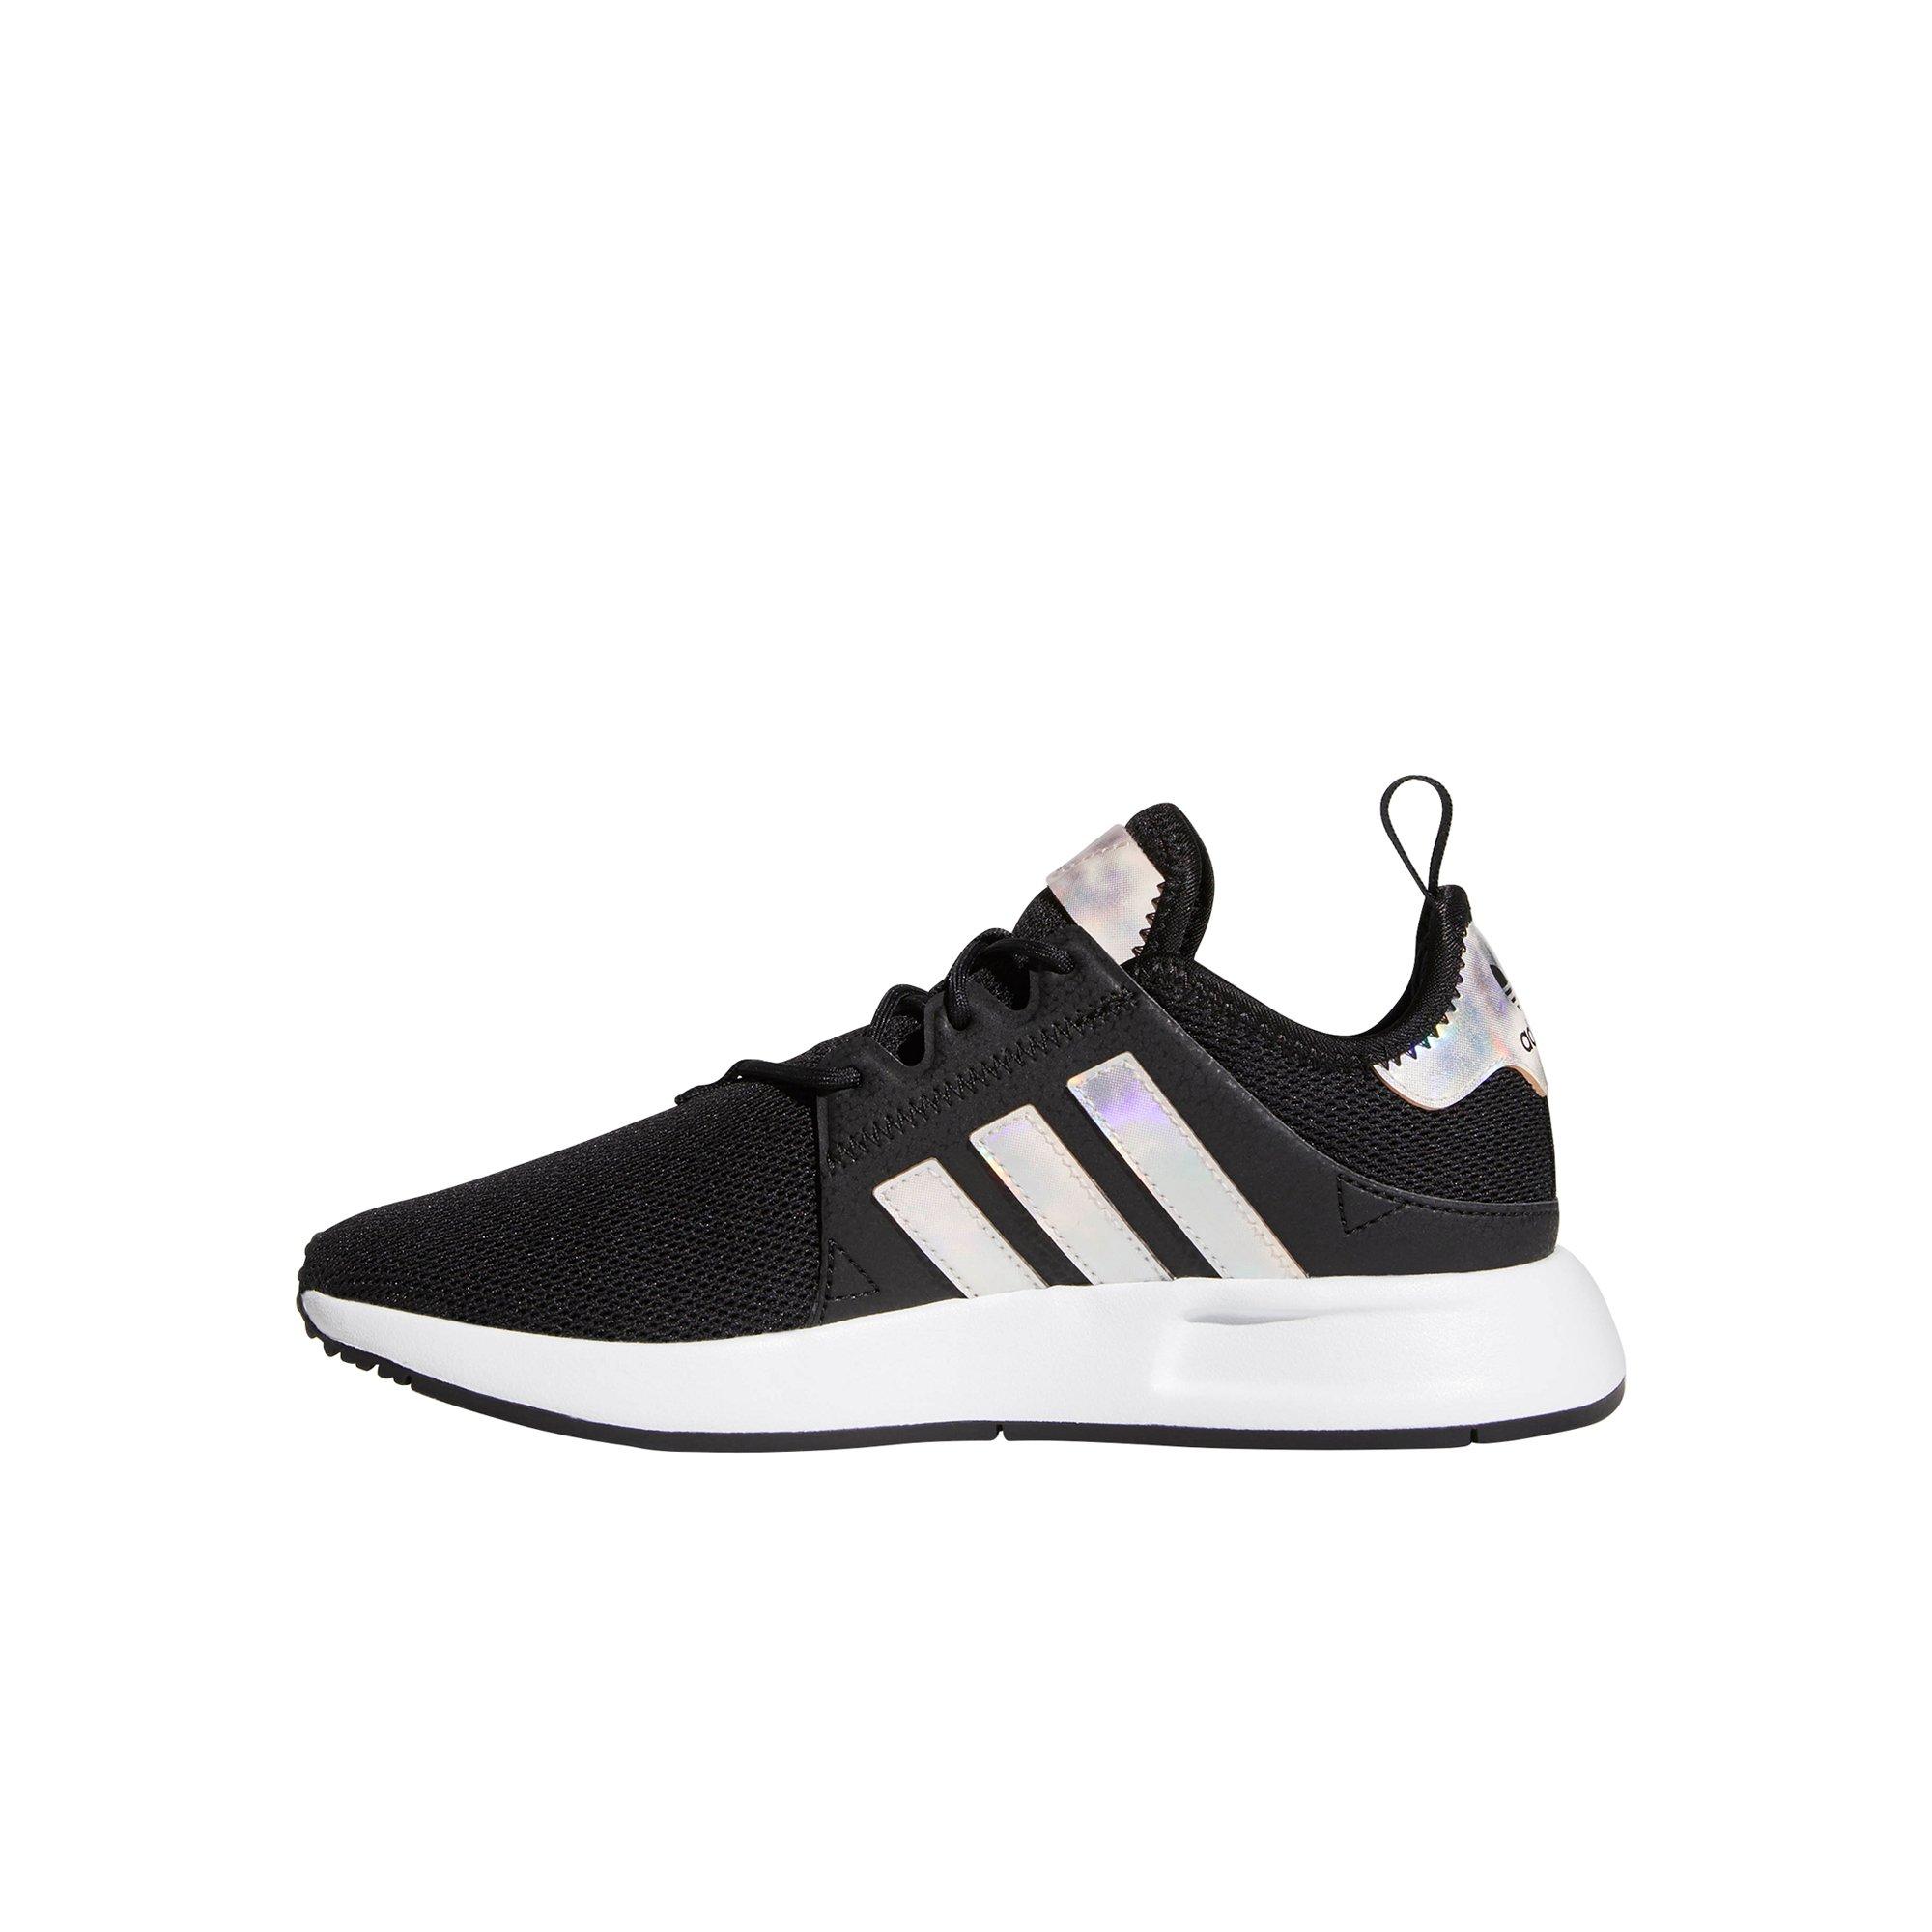 adidas black and white sports shoes